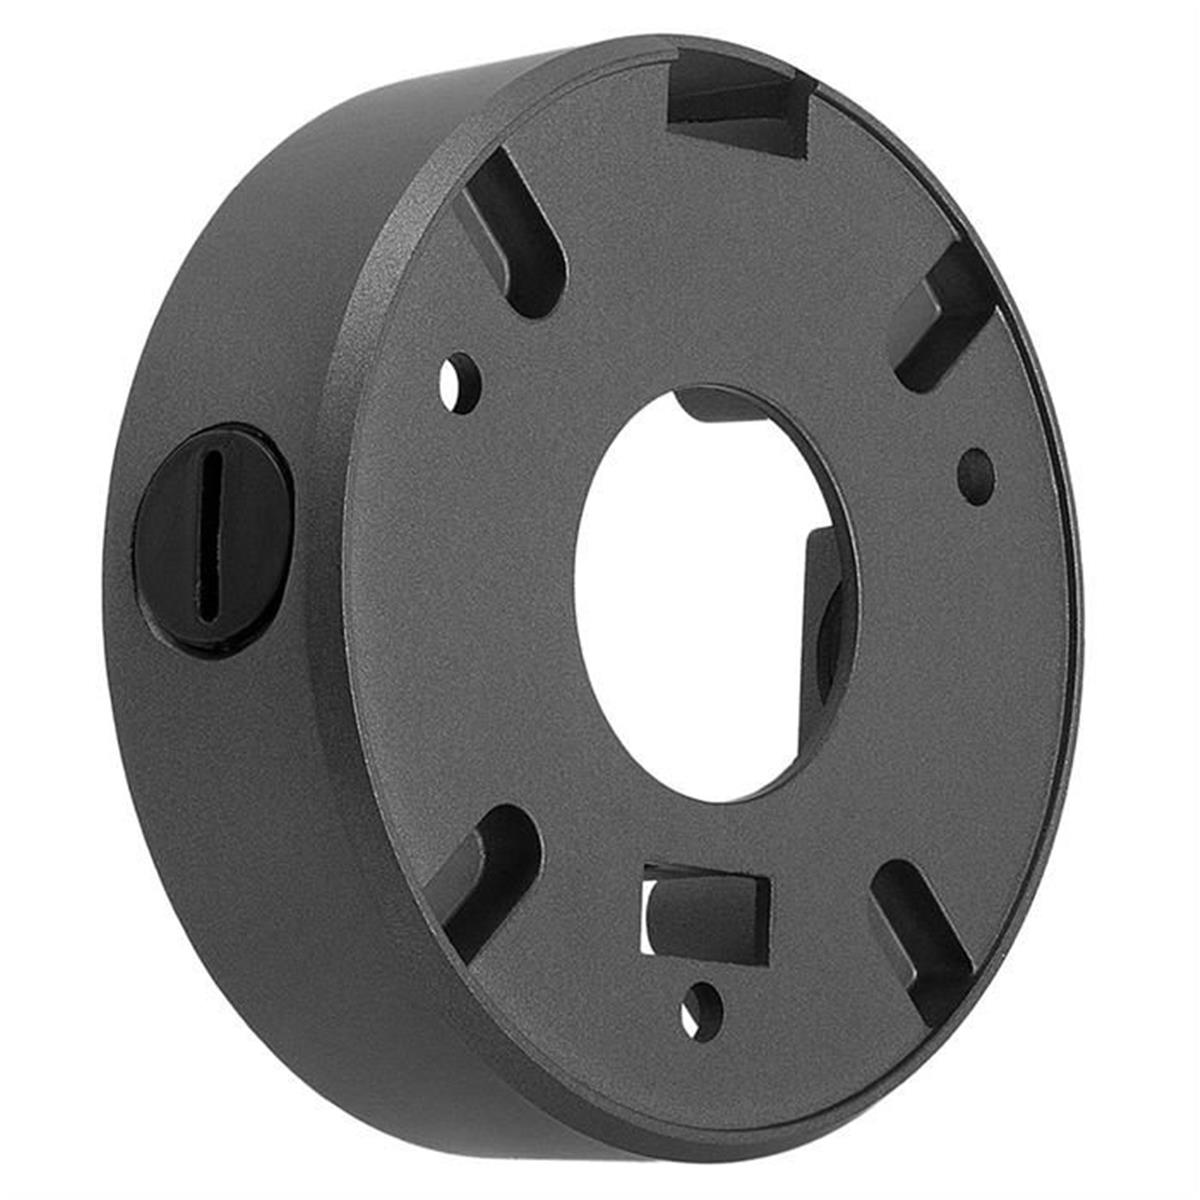 Picture of CMPLE 1283-N CCTV Mounting Junction Box for Small Dome cameras - Dark Gray